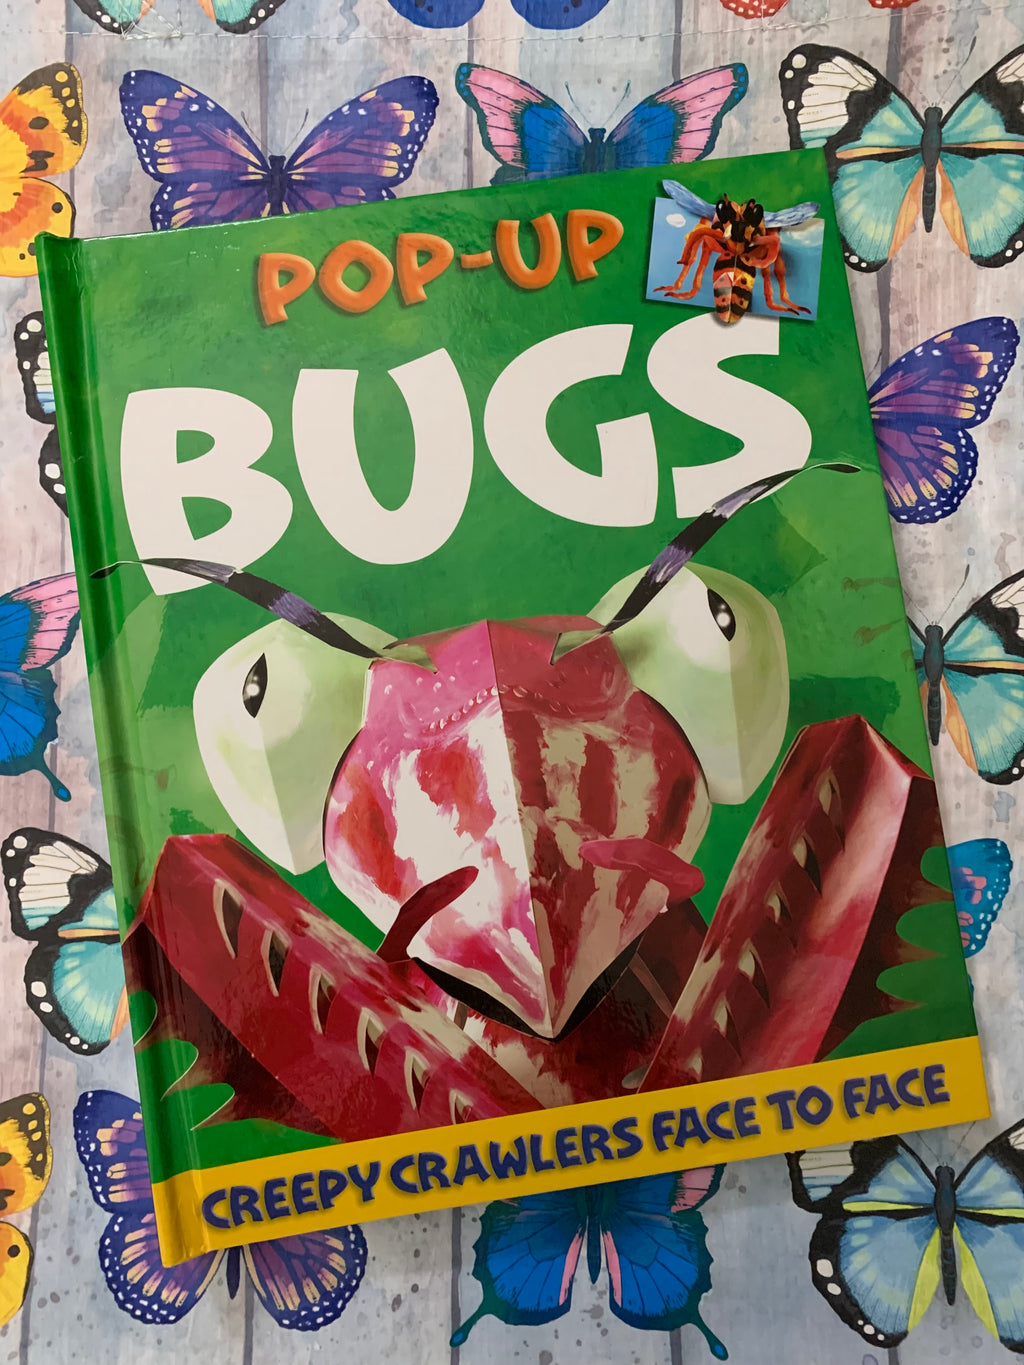 Pop-Up BUGS: Creepy Crawlers Face to Face